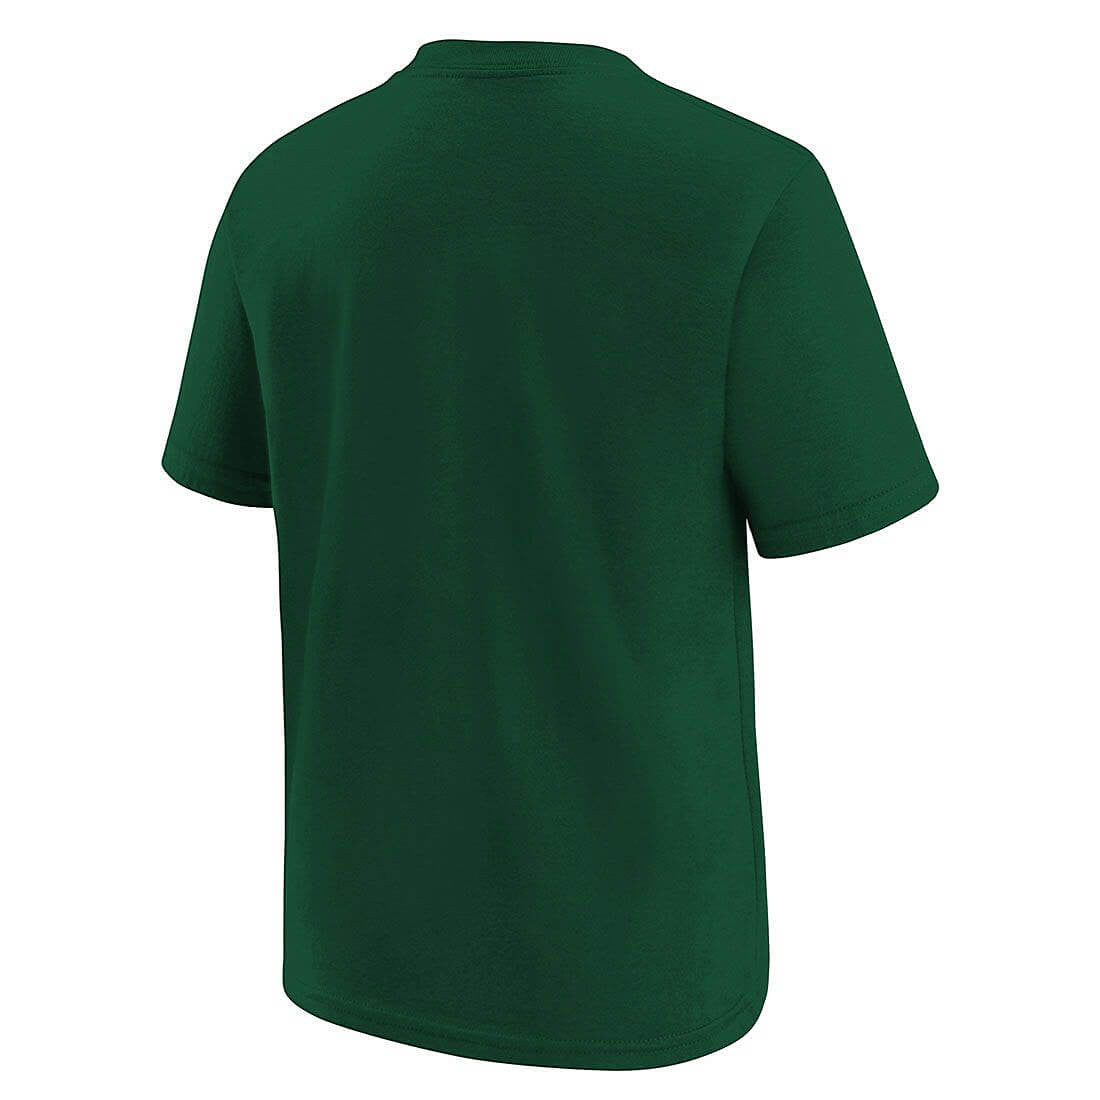 Outerstuff Exemplary Ss V-Neck Tee Green Bay Packers - 8-20Y - Green